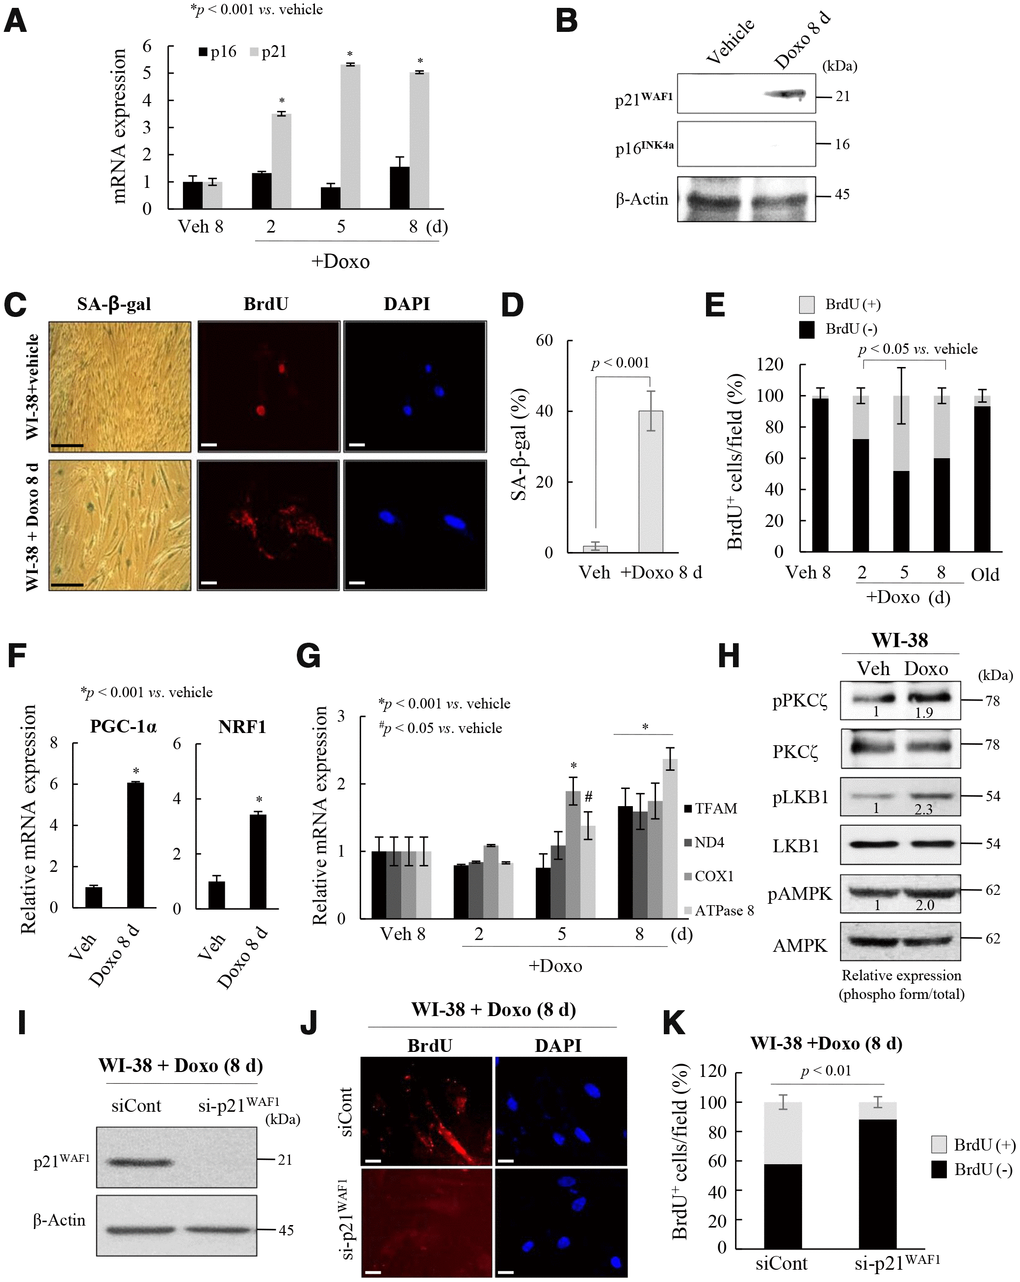 Activation of p21WAF1regulates mitochondrial reprogramming in senescent WI-38 cells. (A) Young WI-38 cells were treated with DOXO (100 ng/mL) for 24 h and maintained for 8 days; the expression of p21WAF1 and p16INK4a was assayed by RT-PCR at the indicated times. (B) Immunoblot analysis. Note induction of p21WAF1, but not p16INJ4a, expression in young cells after Doxo treatment. (C) SA-β-galactosidase expression and BrdU incorporation in mitochondria in young cells after Doxo treatment for 8 days. Nuclei were stained with DAPI. Scale bars, 100 μm (black bar) or 20 μm (white bar). (D) BrdU incorporation in mitochondria was quantified. More than 300 cells were counted in 5 fields. (E) Cells with BrdU (+) mitochondria were counted under a confocal microscope using ImageJ software (n = 20 images/group). (F) RT-qPCR analysis of PGC-1α and NRF1 expression in Doxo-treated WI-38 young cells. (G) The expression of TFAM and the complex-I, -IV, and -V subunits in Doxo-induced senescent WI-38 cells was measured by RT-qPCR. (H) Immunoblot analysis reveals activation of PKCζ, LKB1 and AMPK after Doxo treatment. Band intensity was quantified using ImageJ software. (I) Doxo treated WI-38 cells were transfected with siRNAs-p21WAF1 and subjected to immunoblot analysis. (J) Immunocytochemistry showing the loss of BrdU incorporation in mitochondria by knockdown of p21WAF1 expression in Doxo-treated cells. Nuclei were stained with DAPI. Scale bars, 20 μm. (K) BrdU incorporation in mitochondria was quantified. Confocal microscope images were captured and counted at least 200 cells using ImageJ software (n=10 images/group). Data are means ± SD of three independent experiments per group.